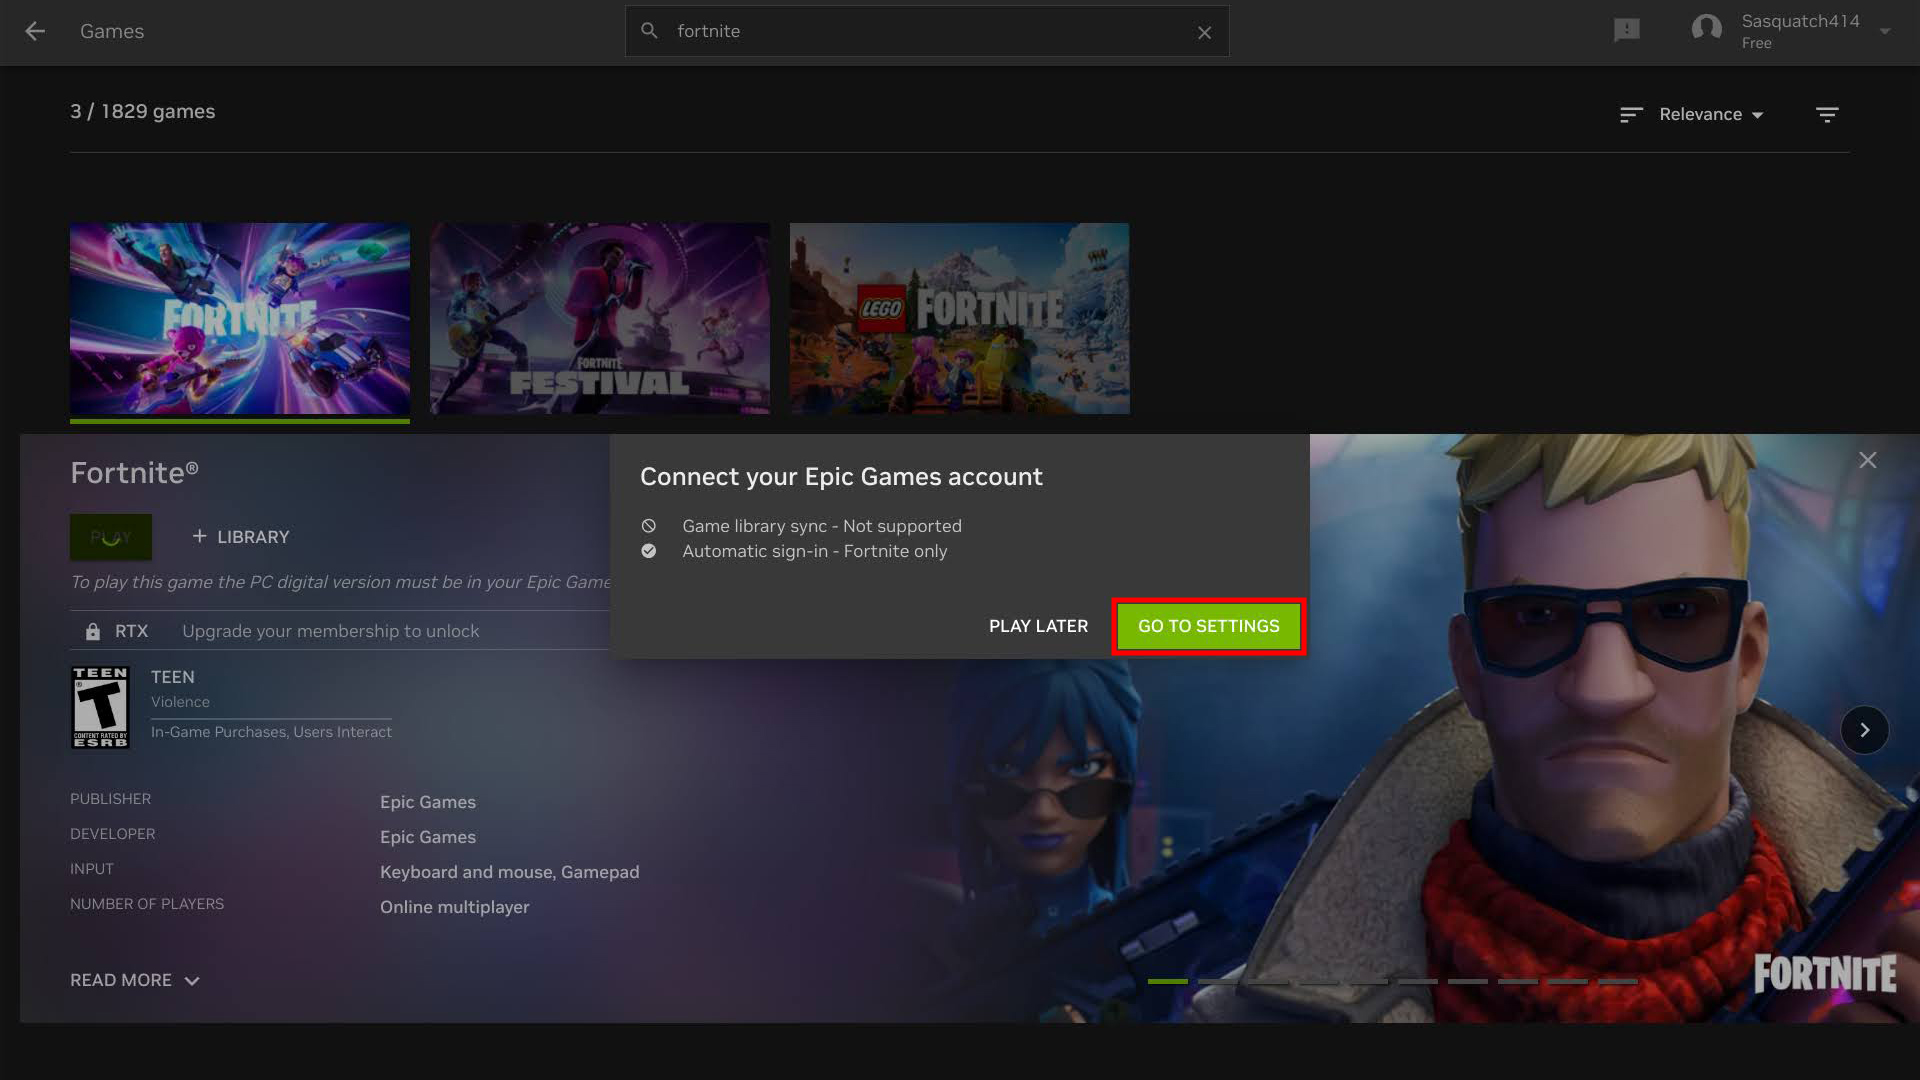 How to play Fortnite on Chromebook using GeForce Now (2)